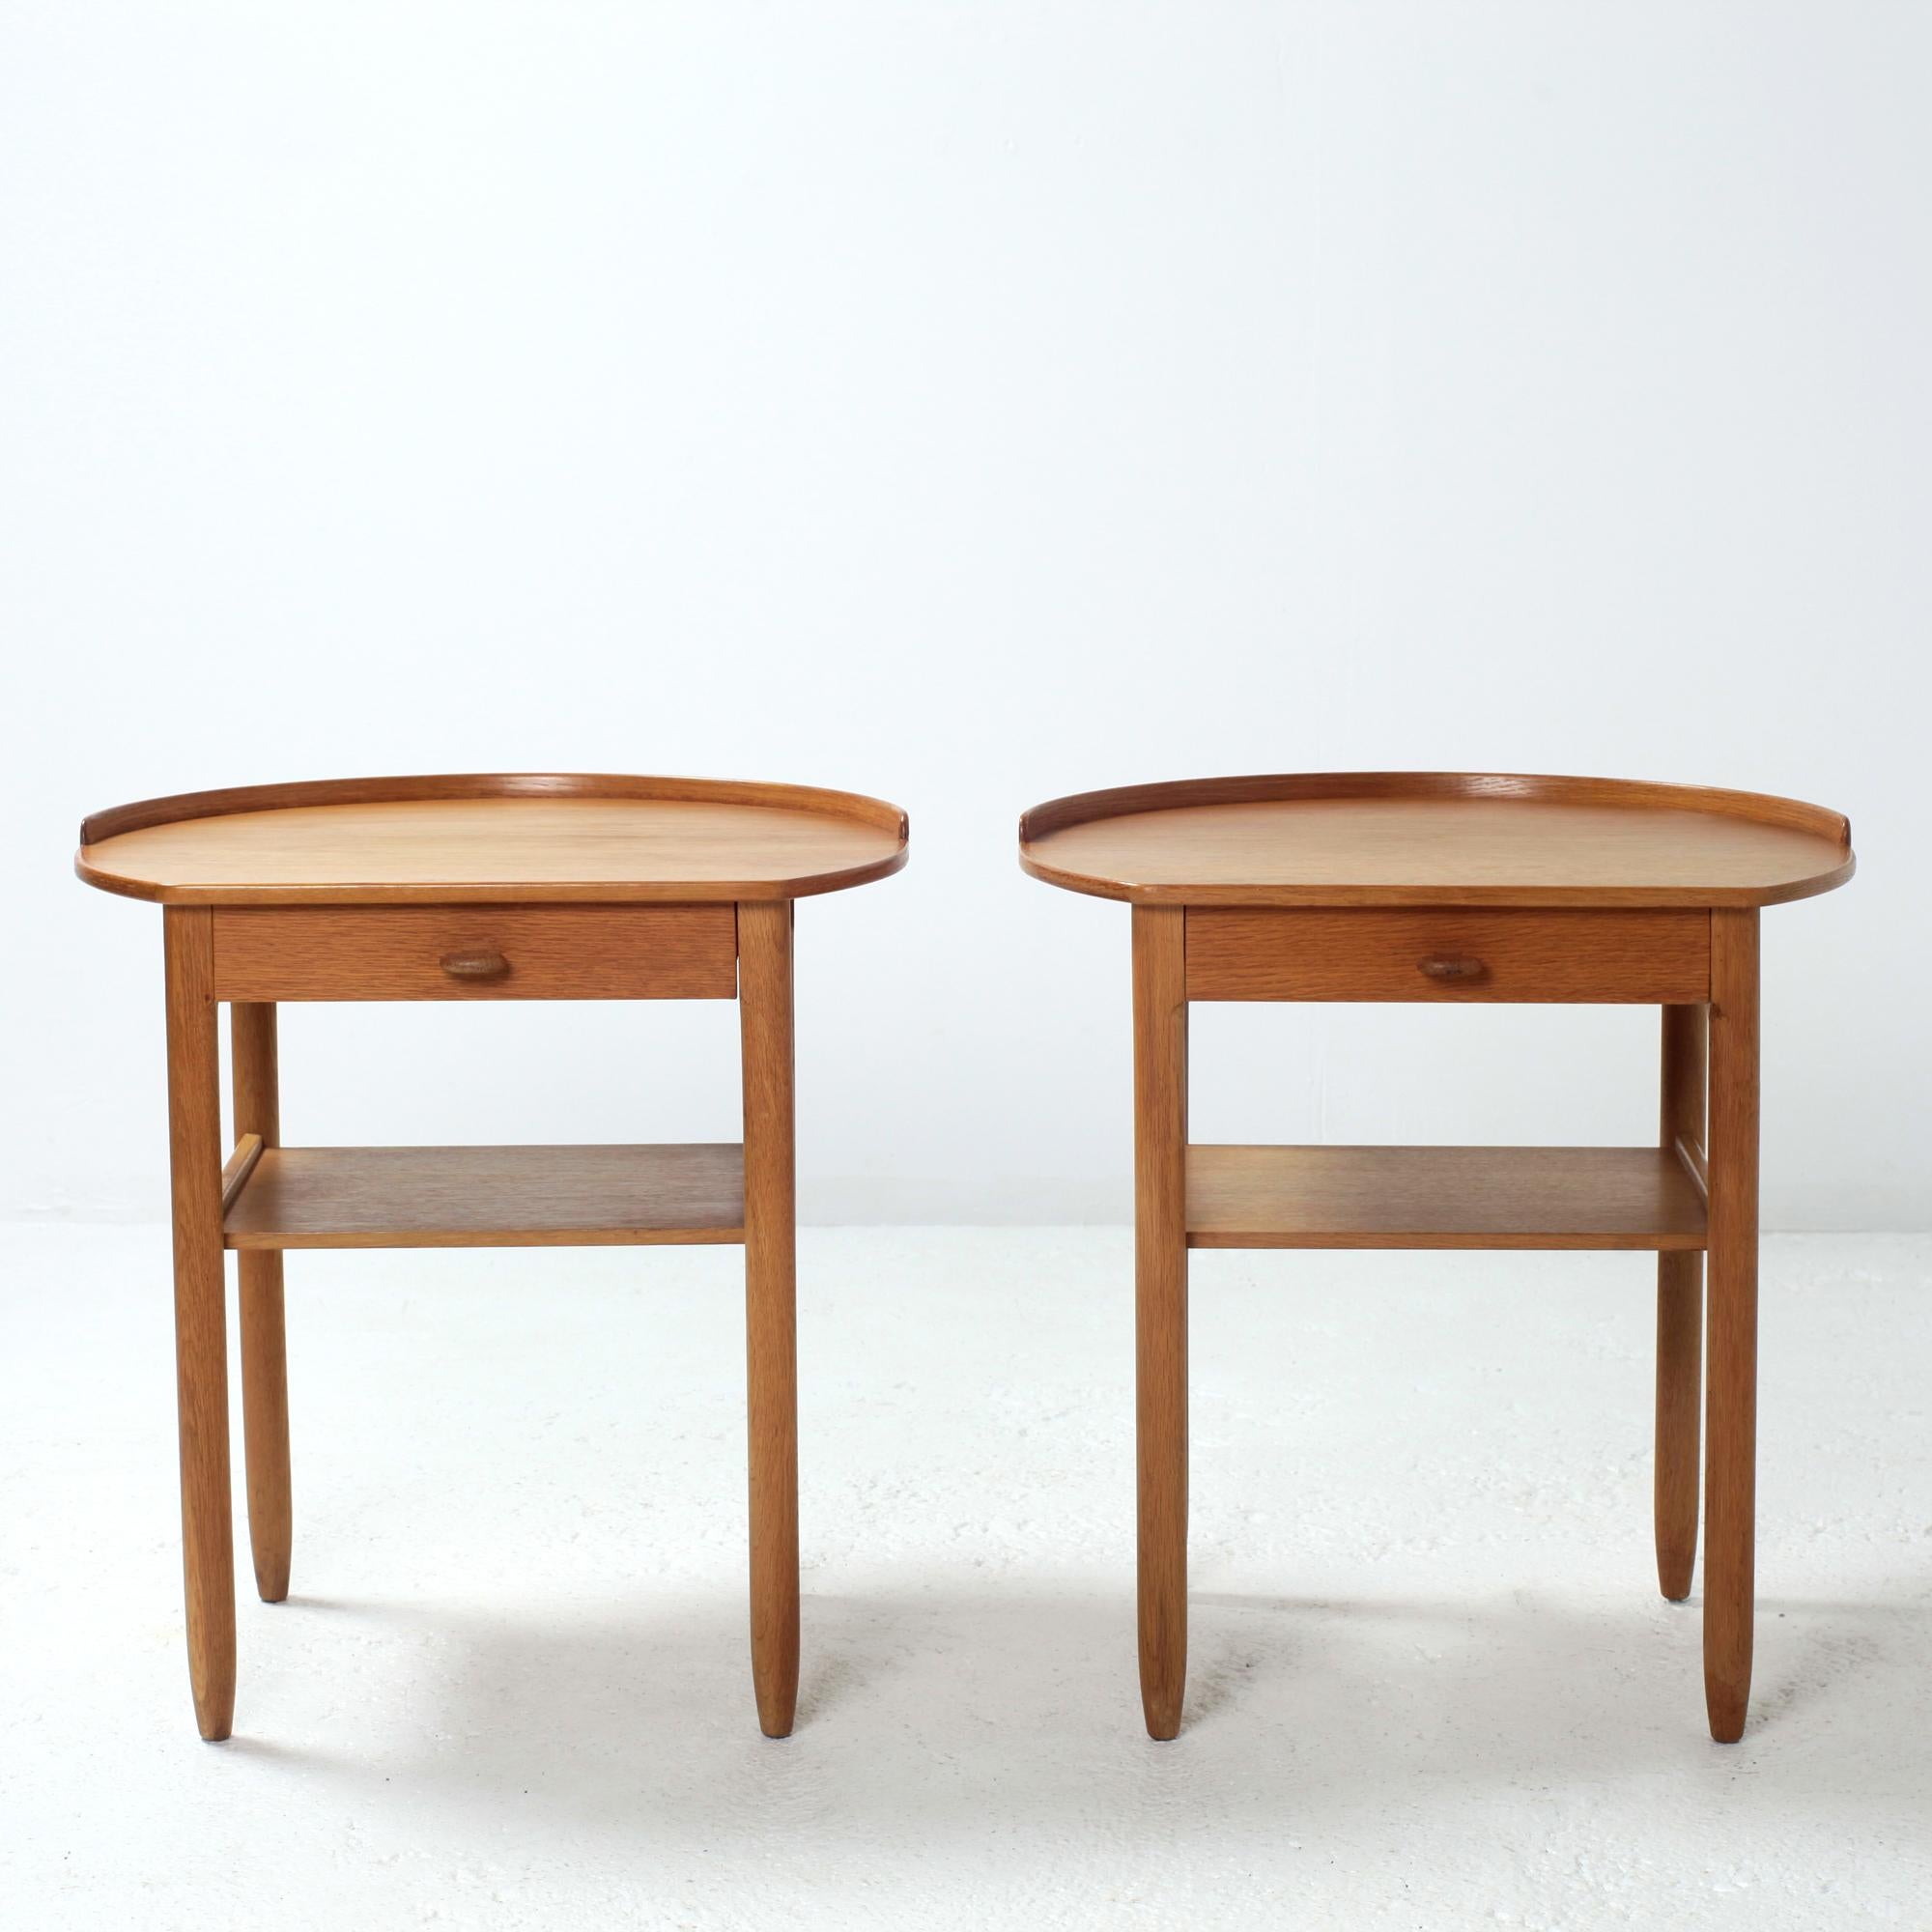 Rare pair of oak bedside tables designed in 1963 by Sven Engström and Gunnar Myrstrand for Bodafors Sweden.
Elegant rounded design with nice details like sculpted drawer handles and a rim around half the table tops.
Stamped.